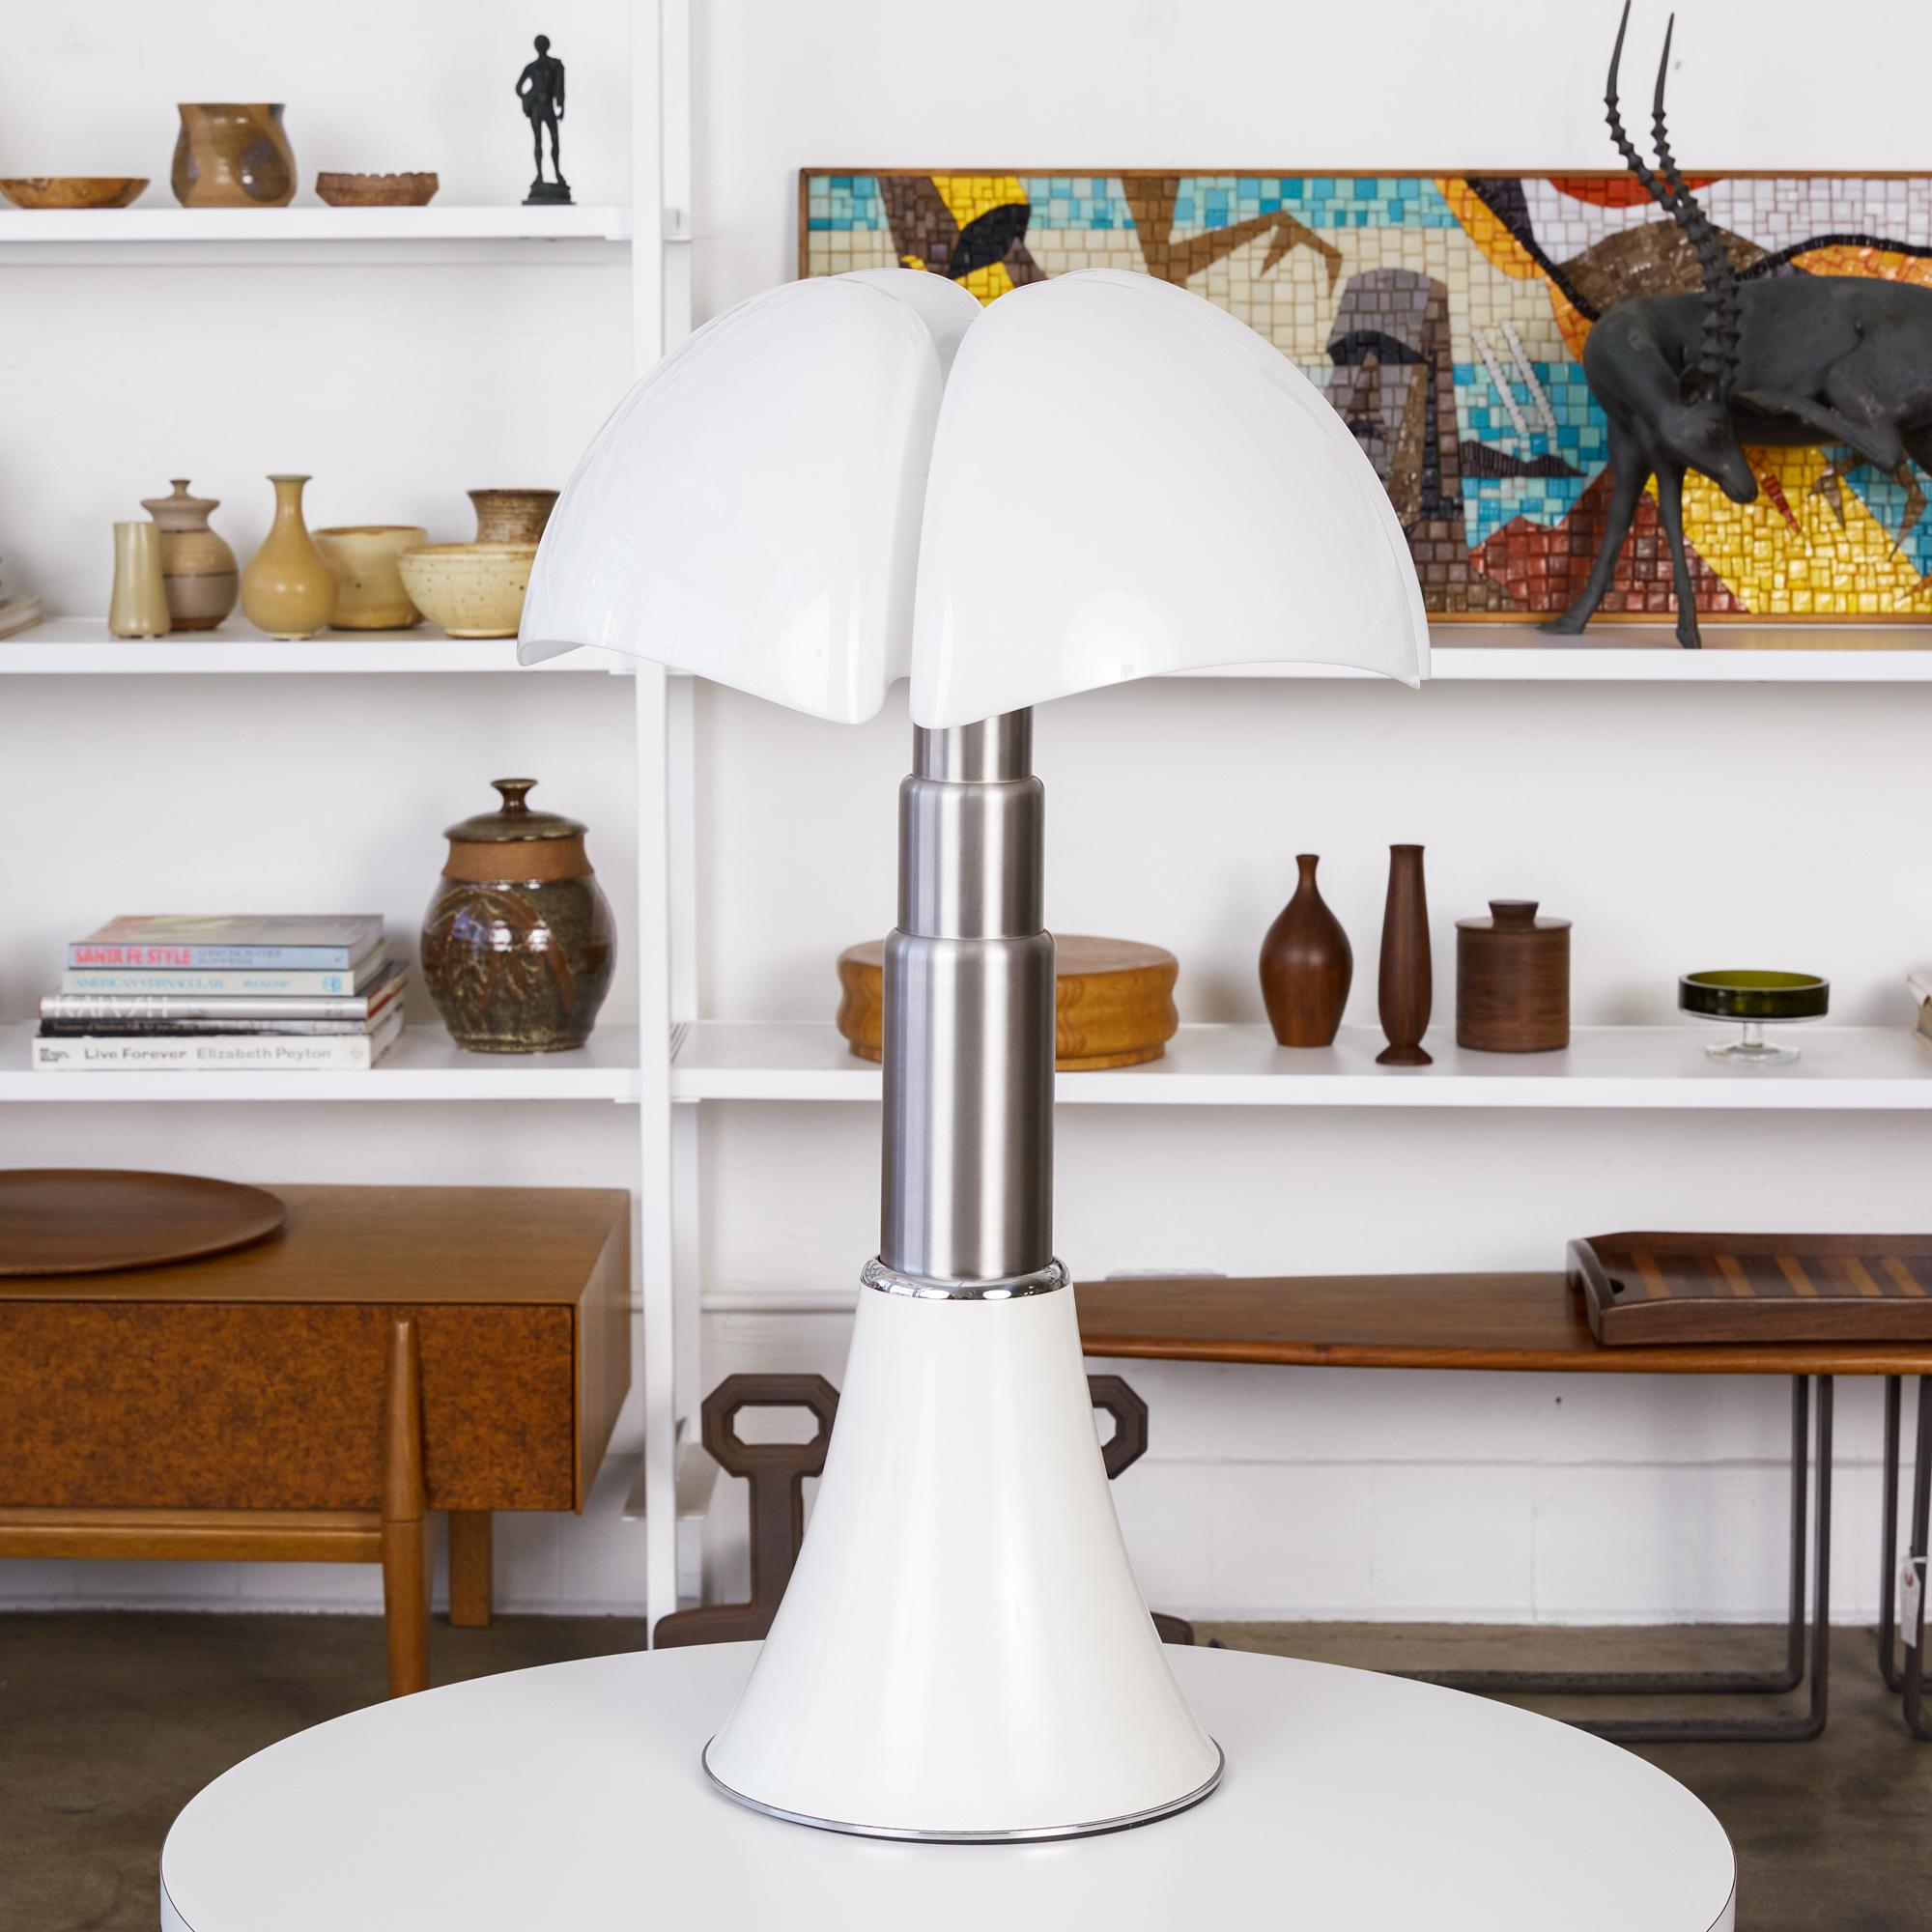 Pipistrello table lamp by Gae Aulenti for Martinelli Luce. The Model 620 lamp was designed in 1965 by the Italian design maestro and has remained a steadfast classic for generations. The lamp features a sculptural opal plastic shade, white painted